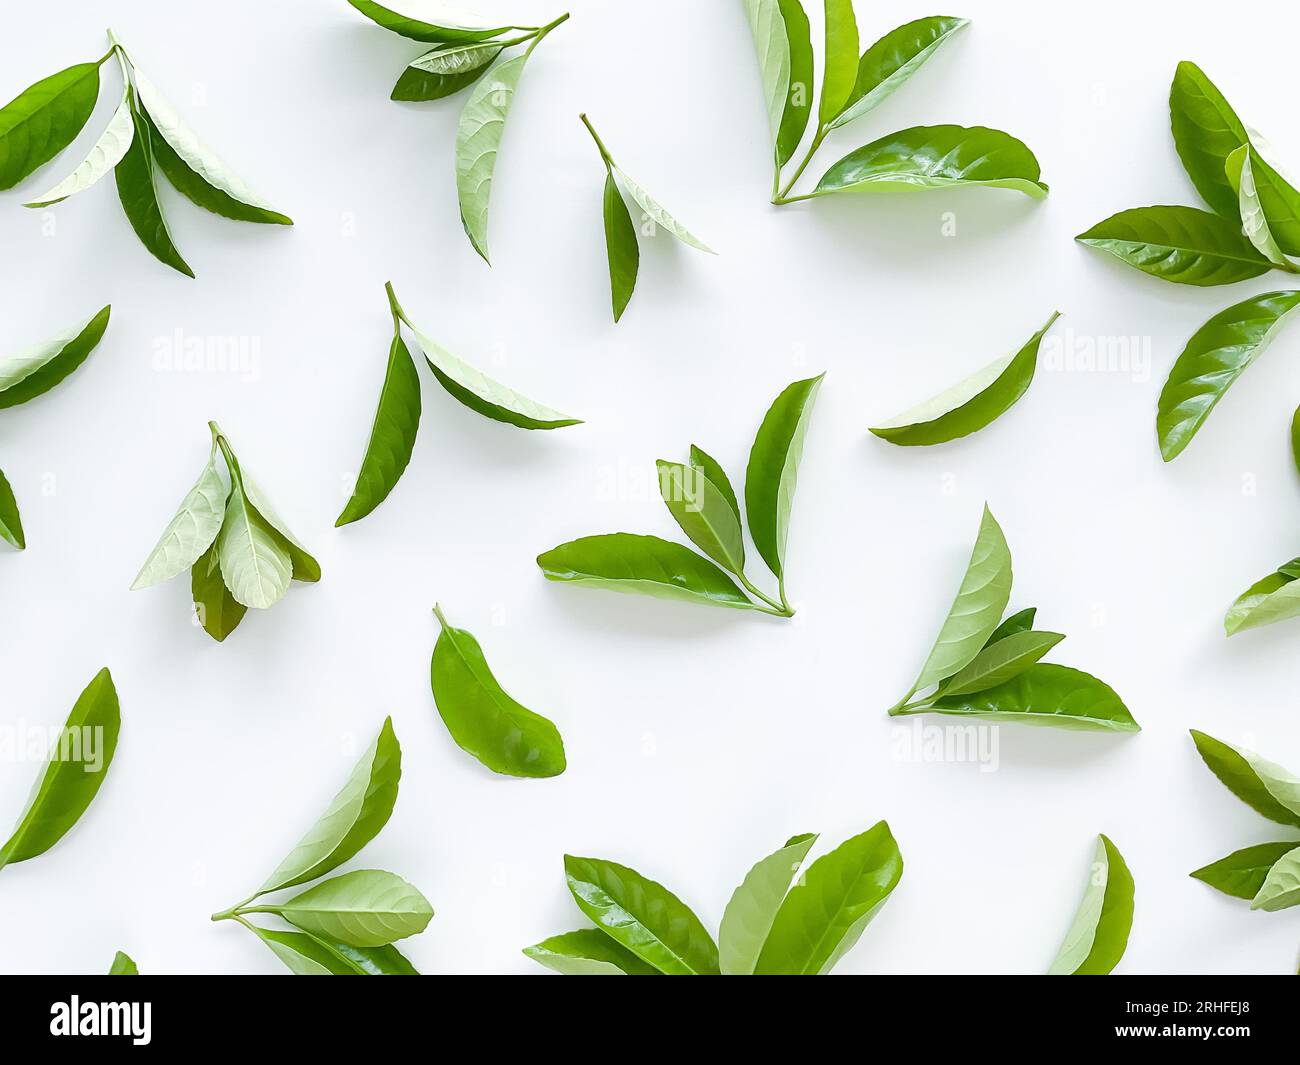 green leaves on a white background. Large fresh decorative leaves. Stock Photo